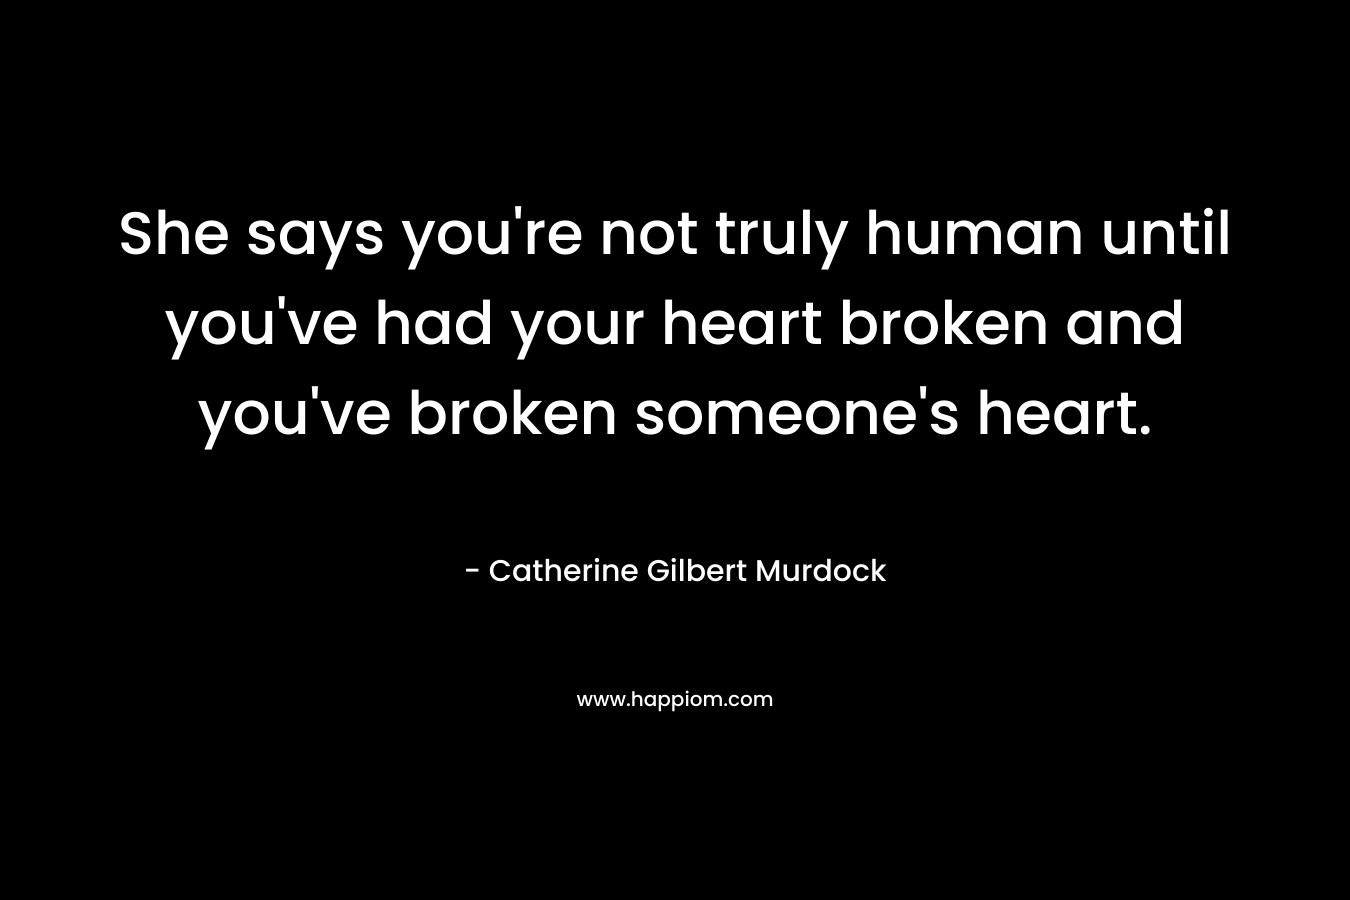 She says you're not truly human until you've had your heart broken and you've broken someone's heart.